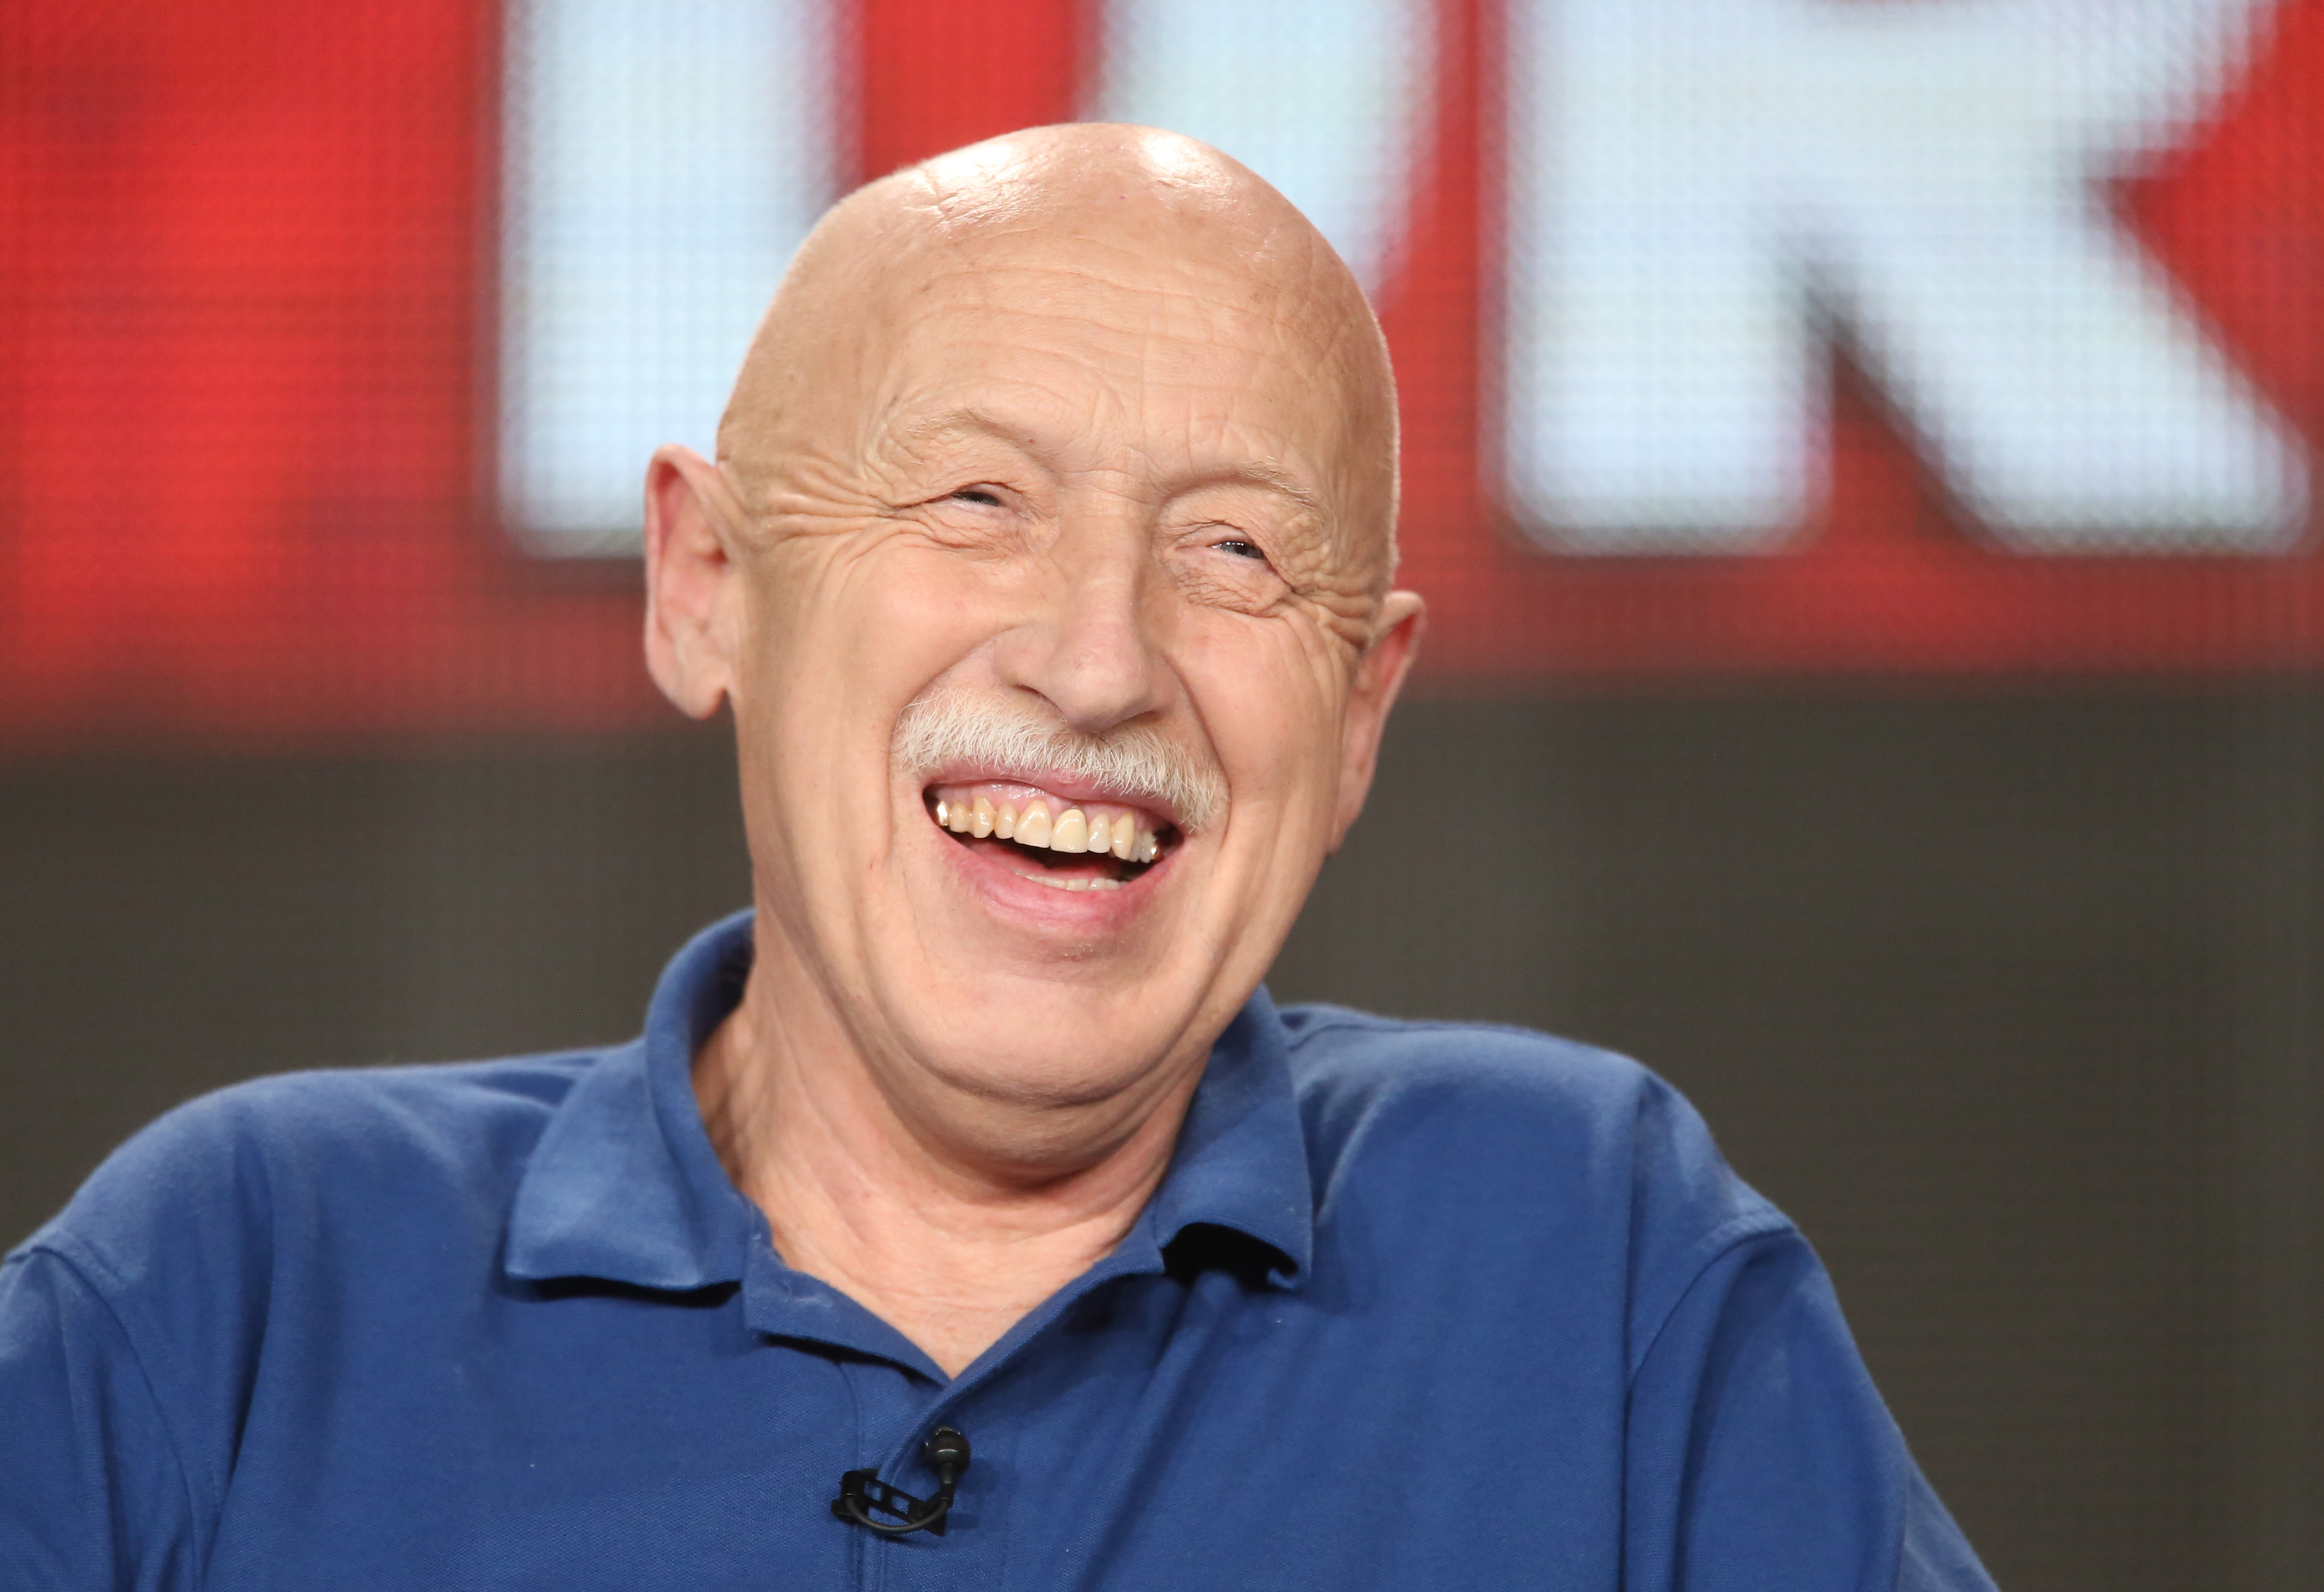 'The Incredible Dr. Pol' star Dr. Jan Pol is shown laughing during a publicity event